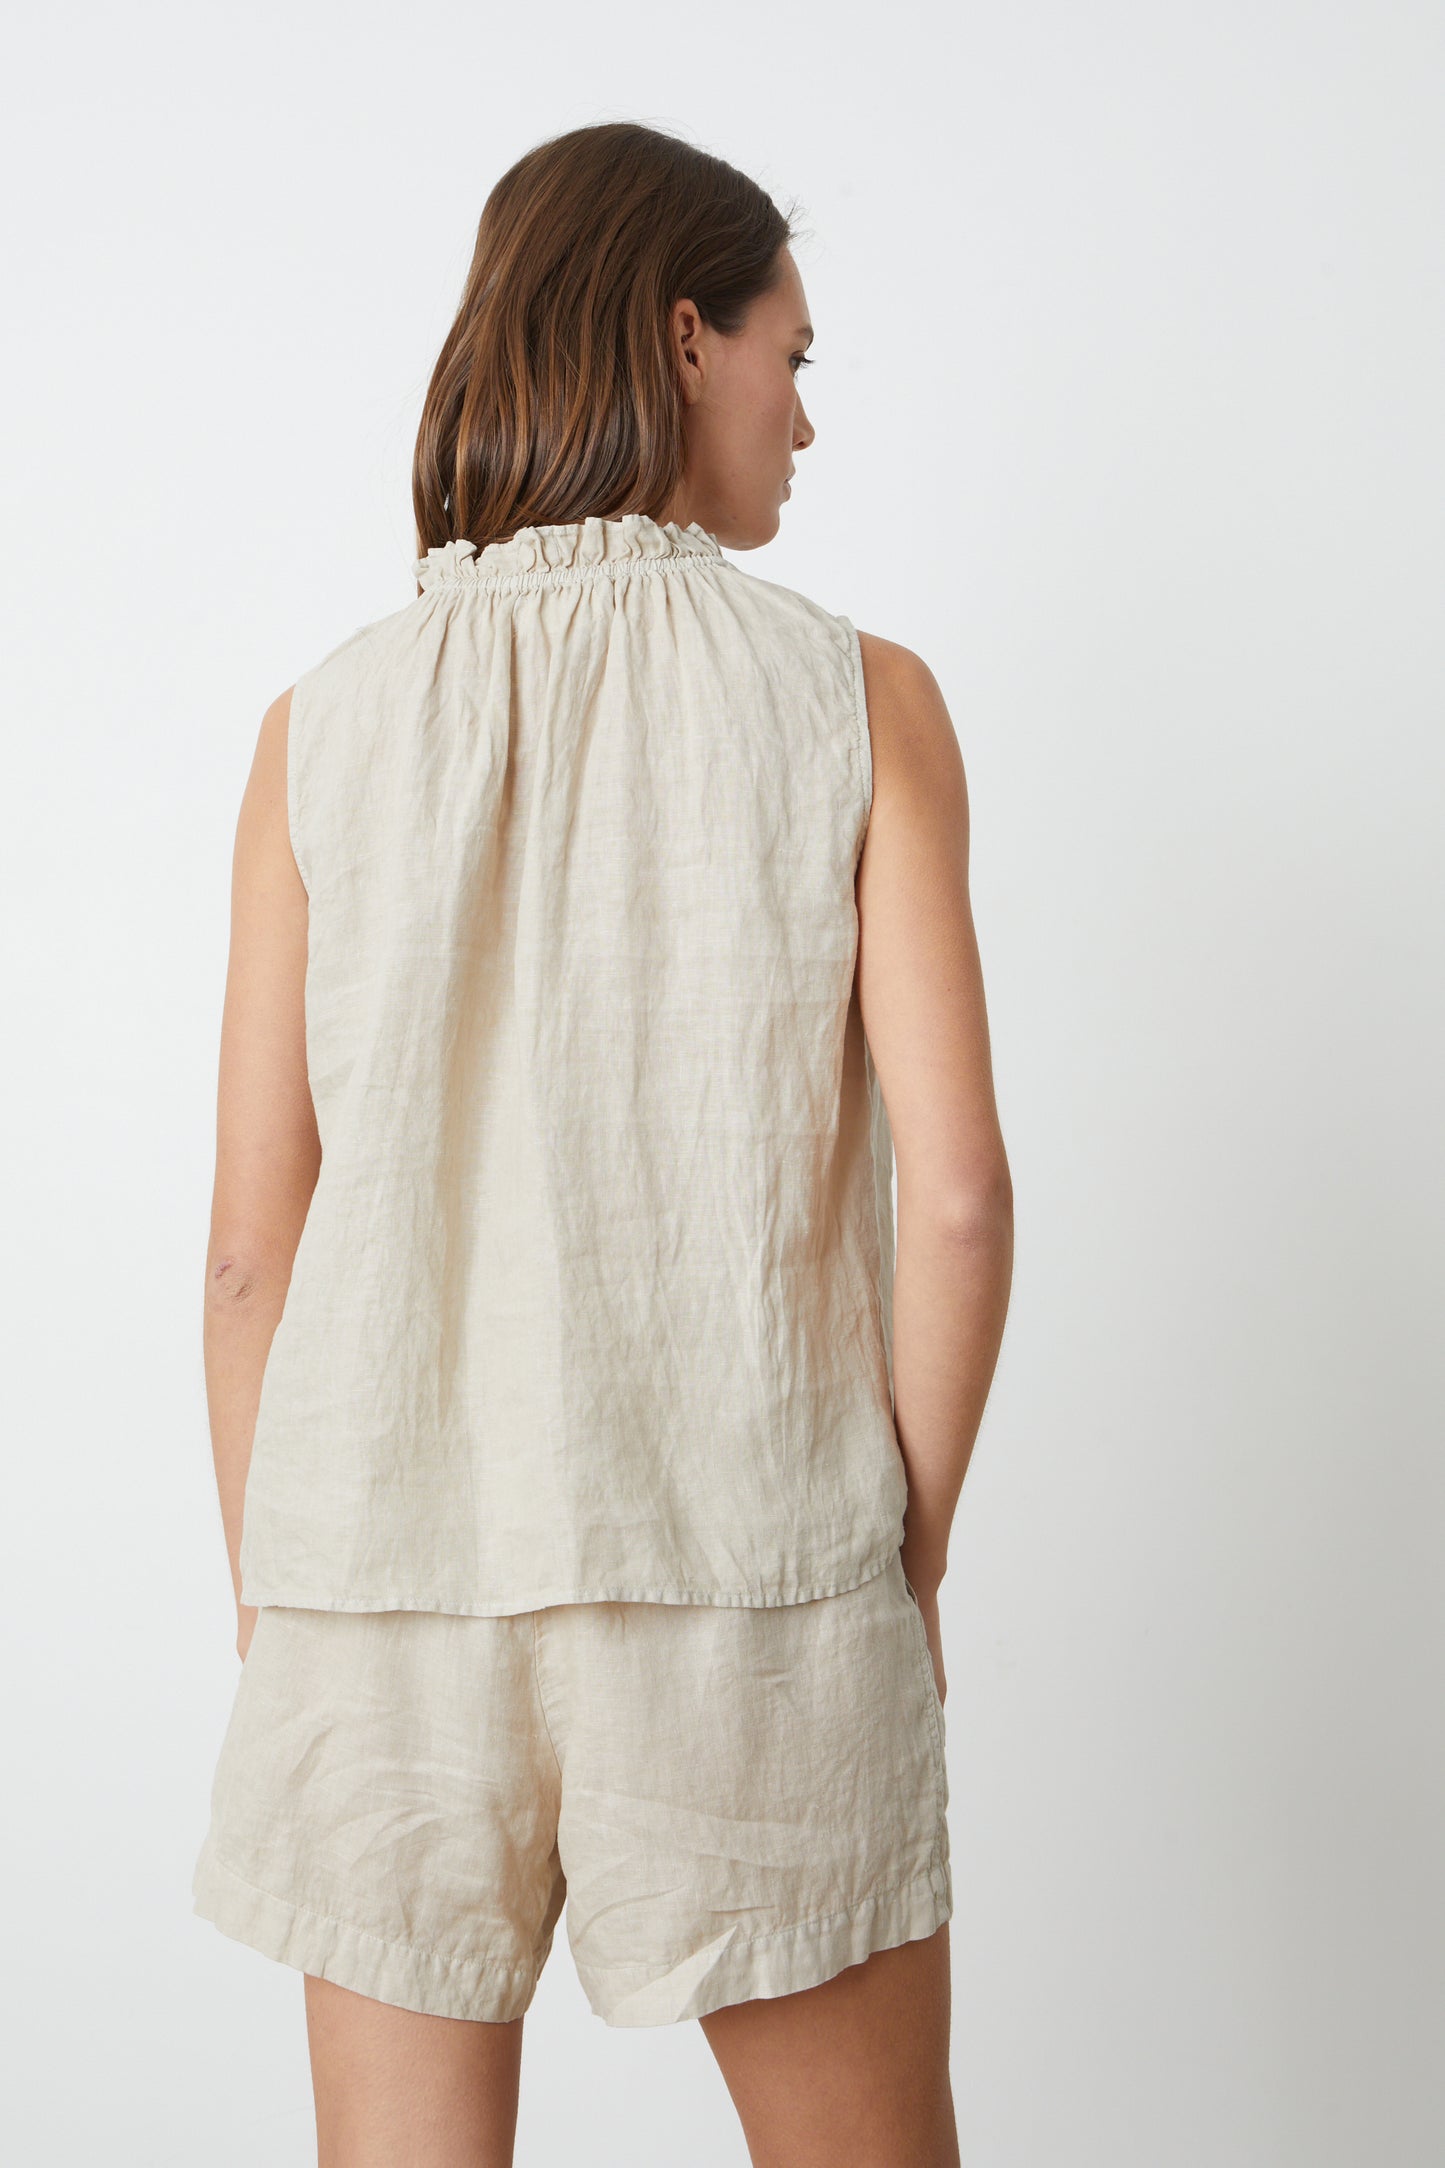 The back view of a woman wearing a Velvet by Graham & Spencer NOVA LINEN TOP and shorts.-26577321590977